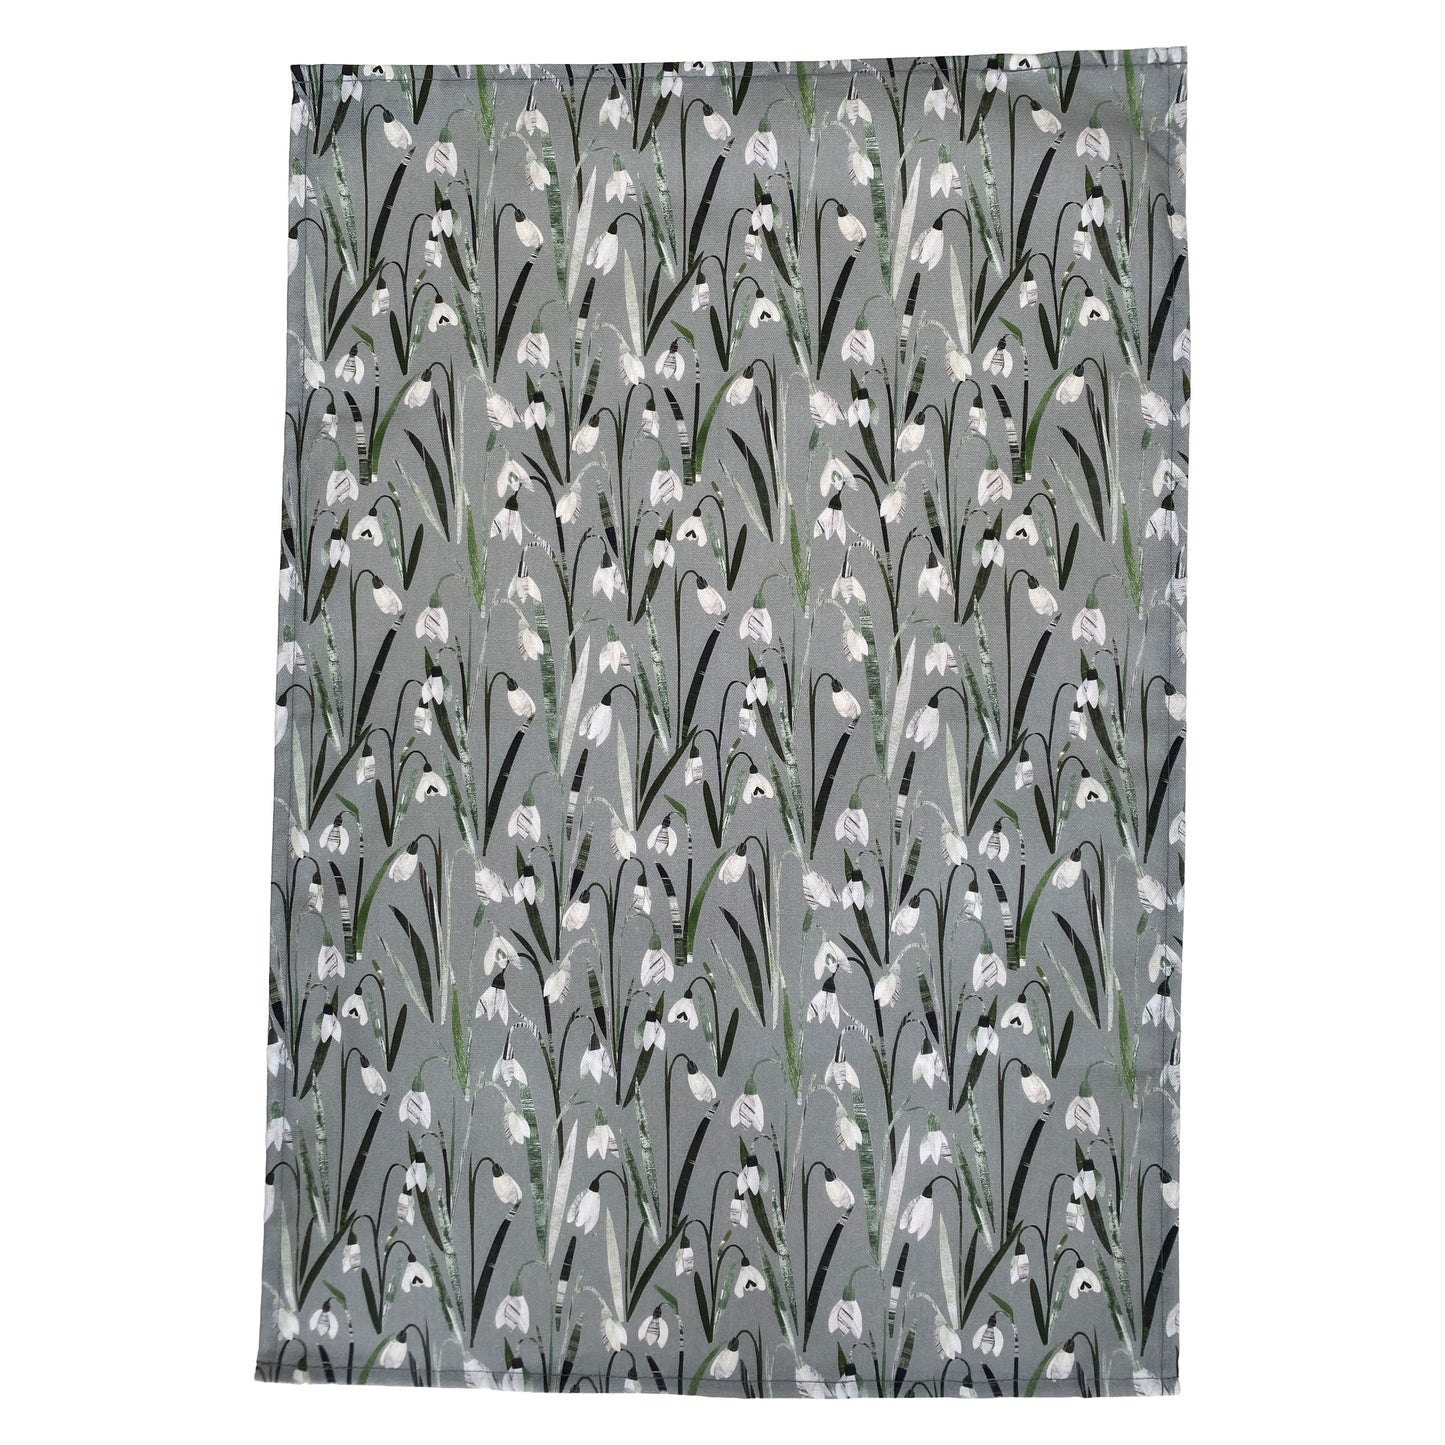 A full Snowdrops Tea Towel featuring Snowdrops in Cream and white with green leaves and a soft Sage Green background.   The tea Towel has been placed on a plain white background.